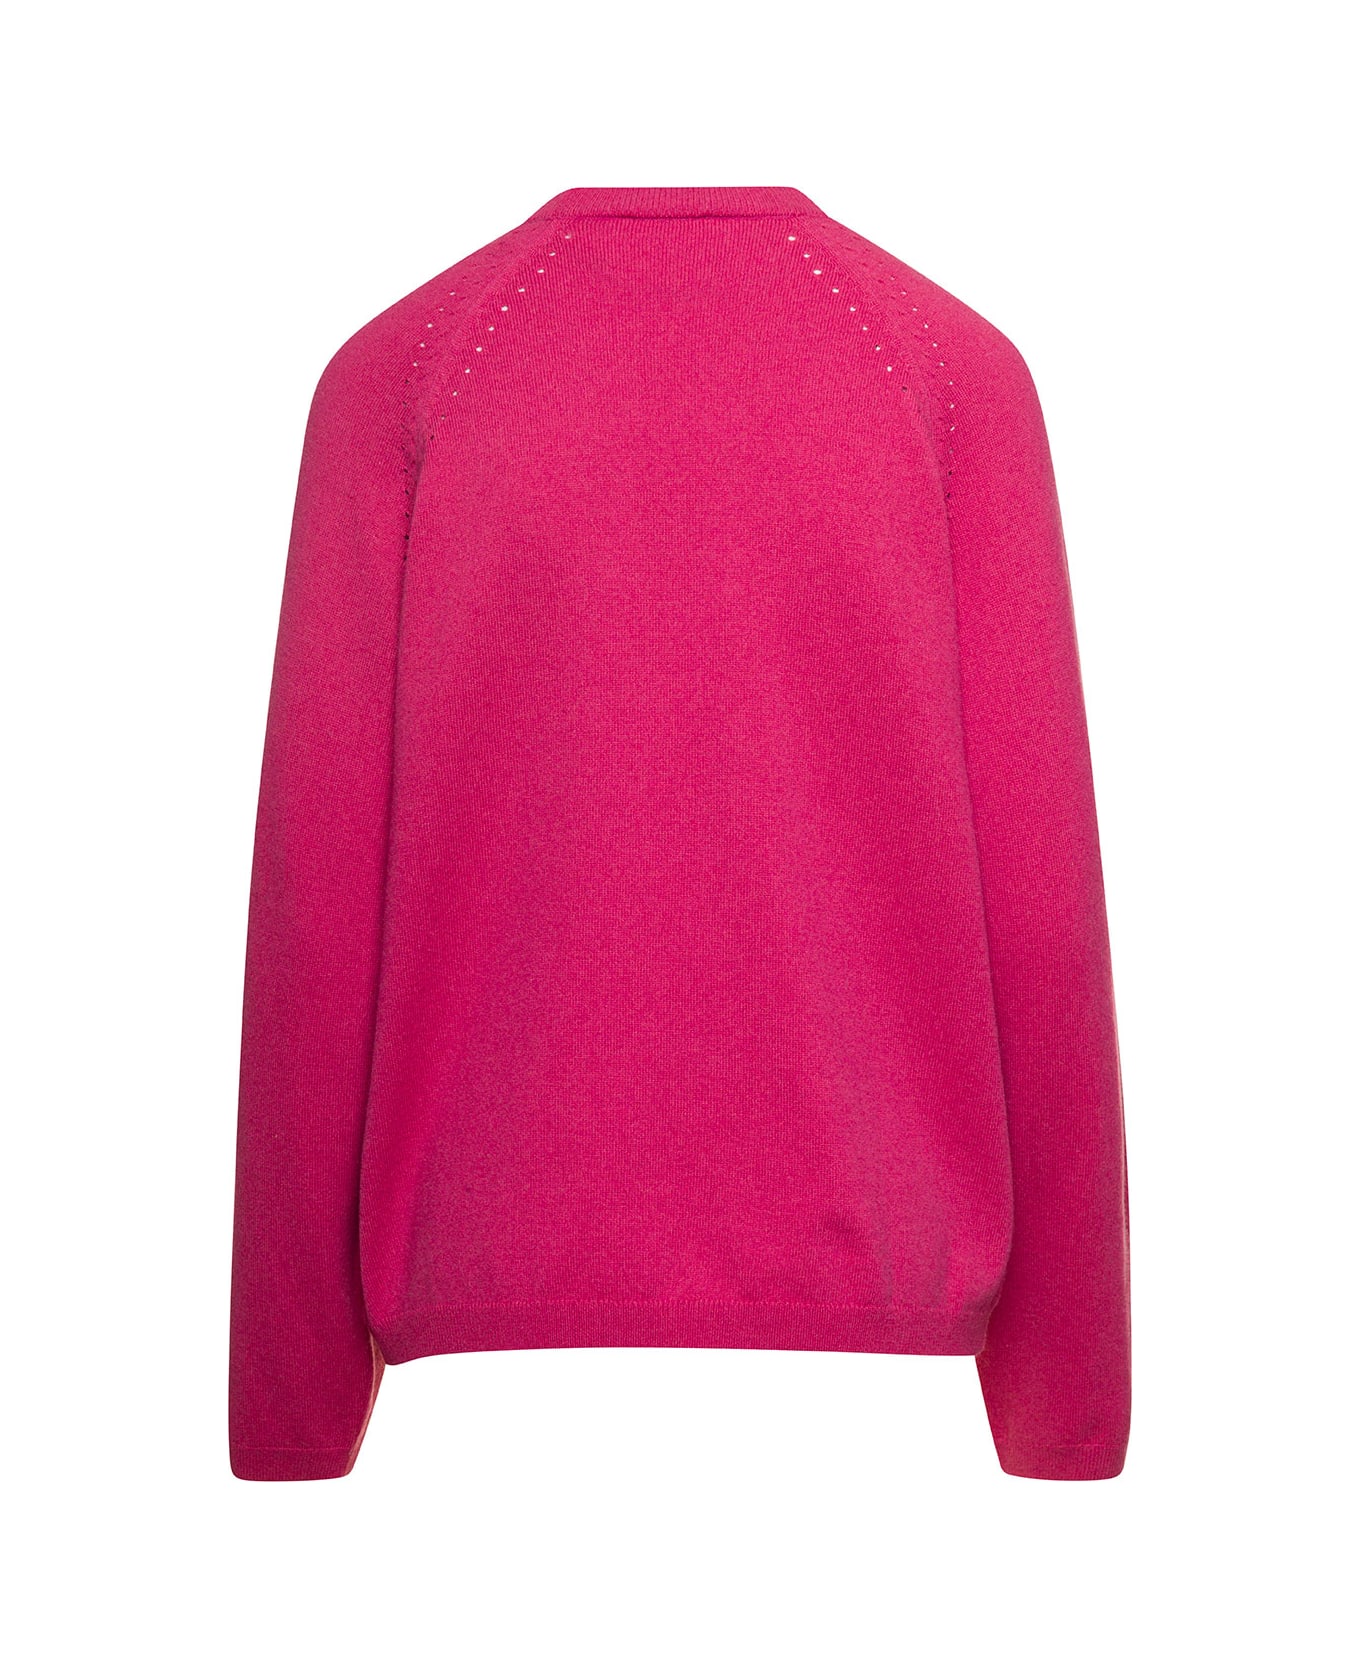 A.P.C. 'rosanna' Fuchsia Crewneck Sweater With Perforated Details In Cotton And Cashmere Woman - Fuxia